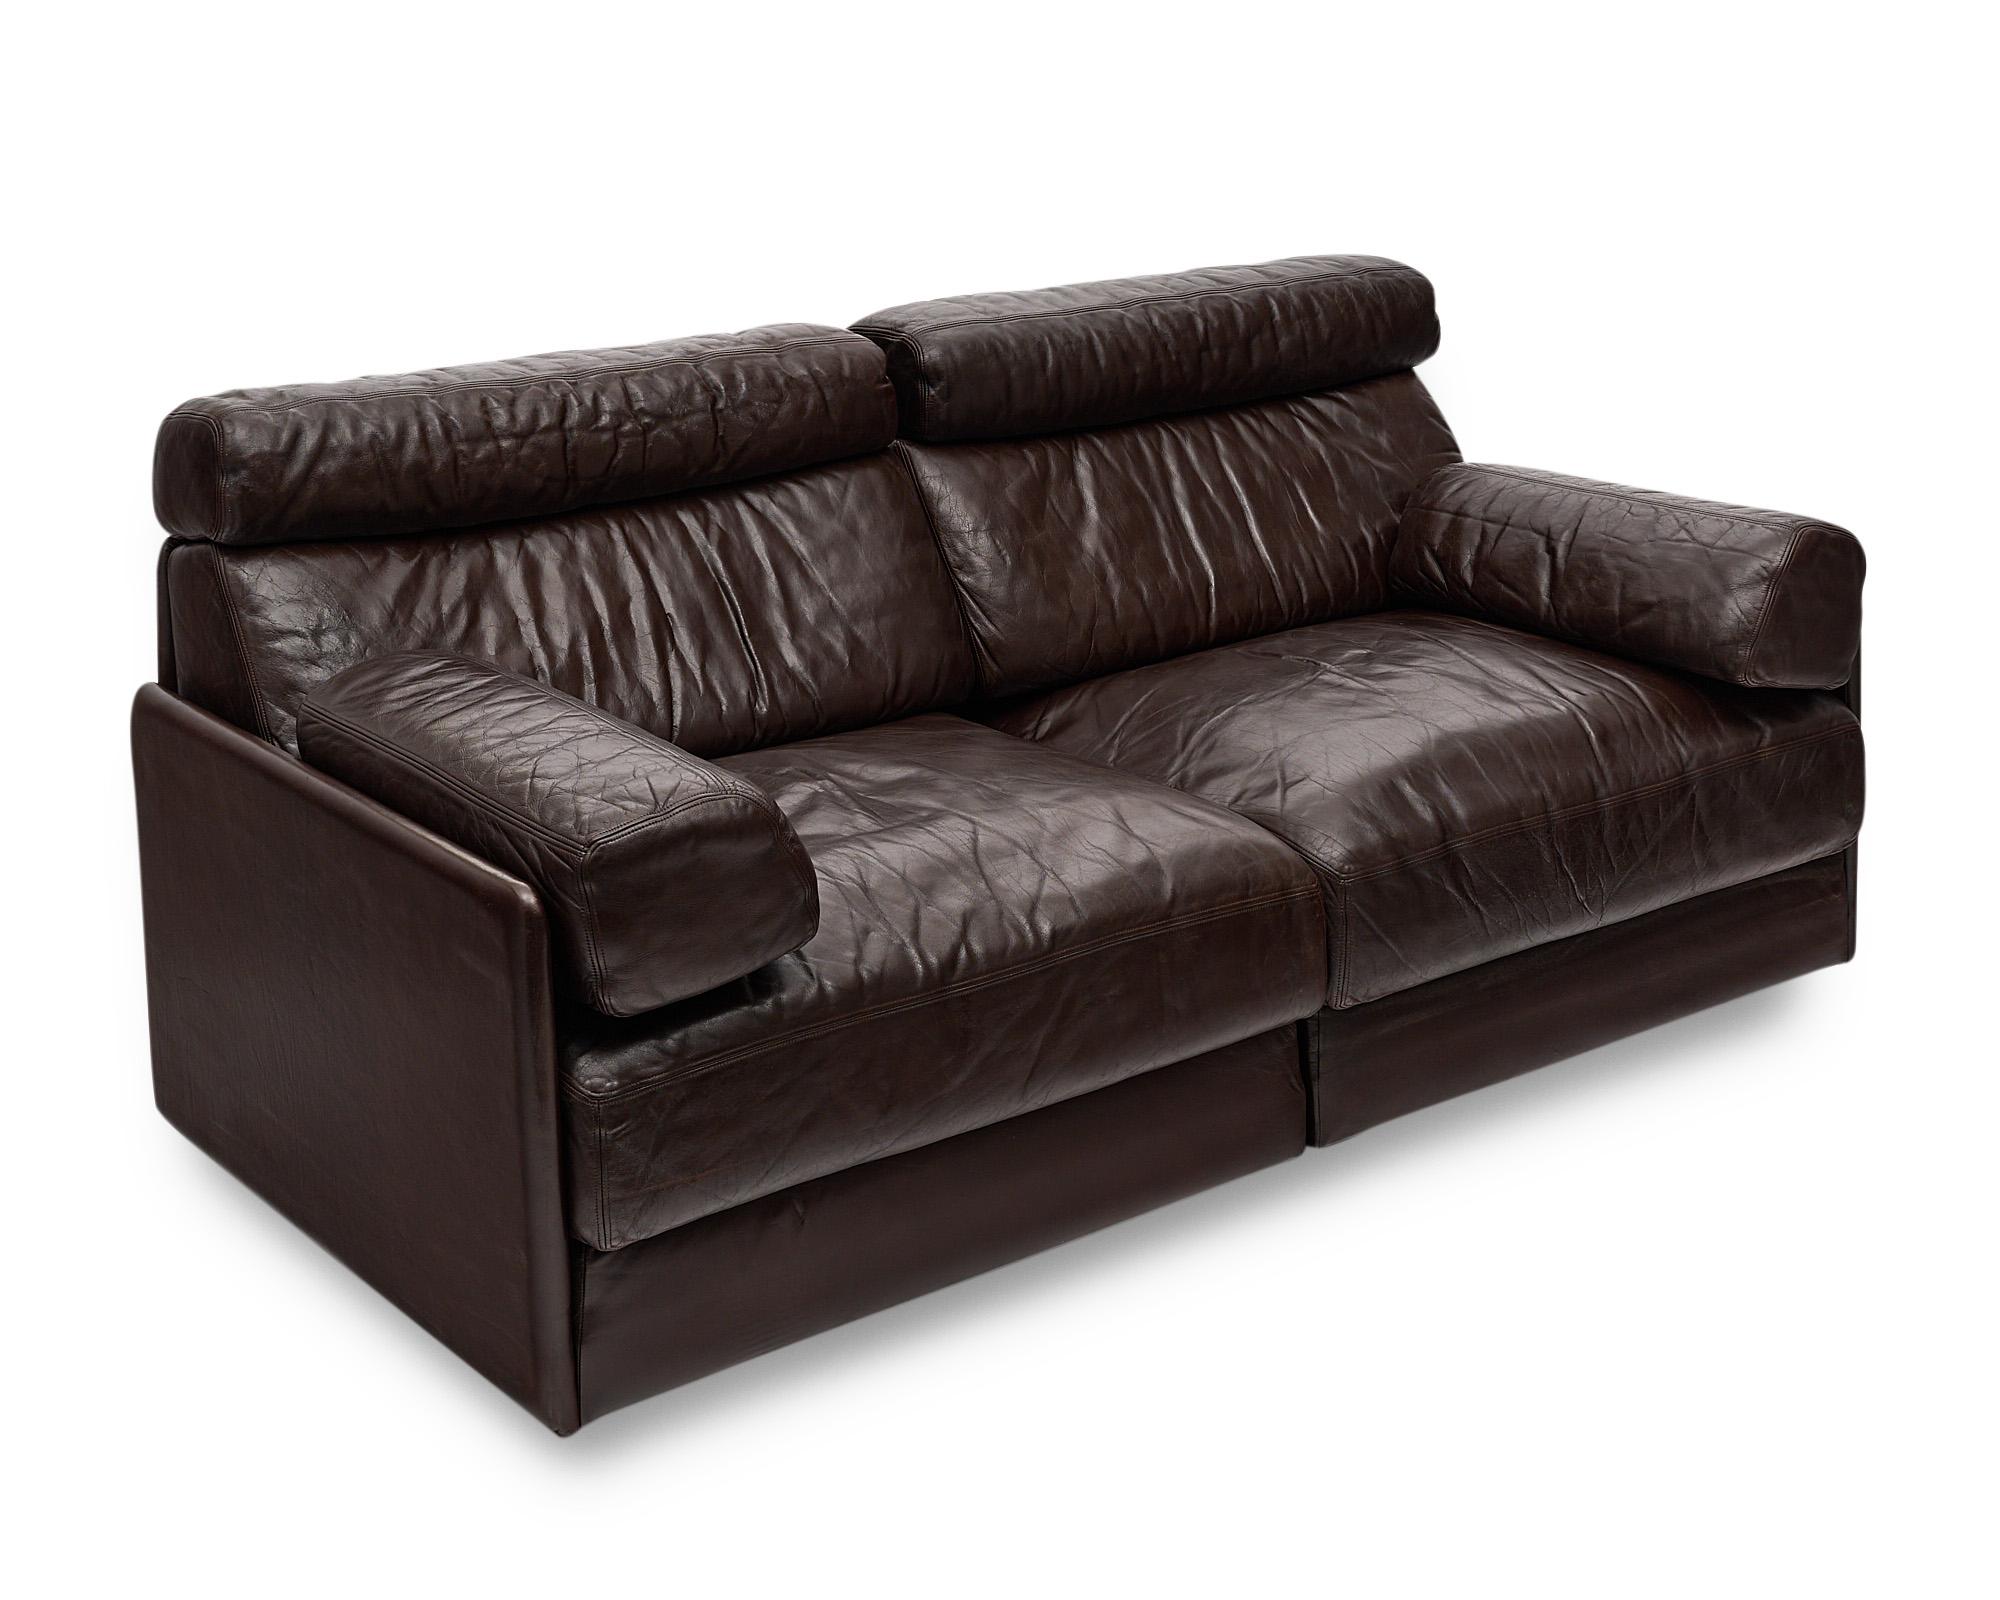 DeSede leather sofa, circa 1970, of thick leather brown hide. The iconic leather sofa is comfortable and versatile, all zippers are in great condition. The piece is signed.